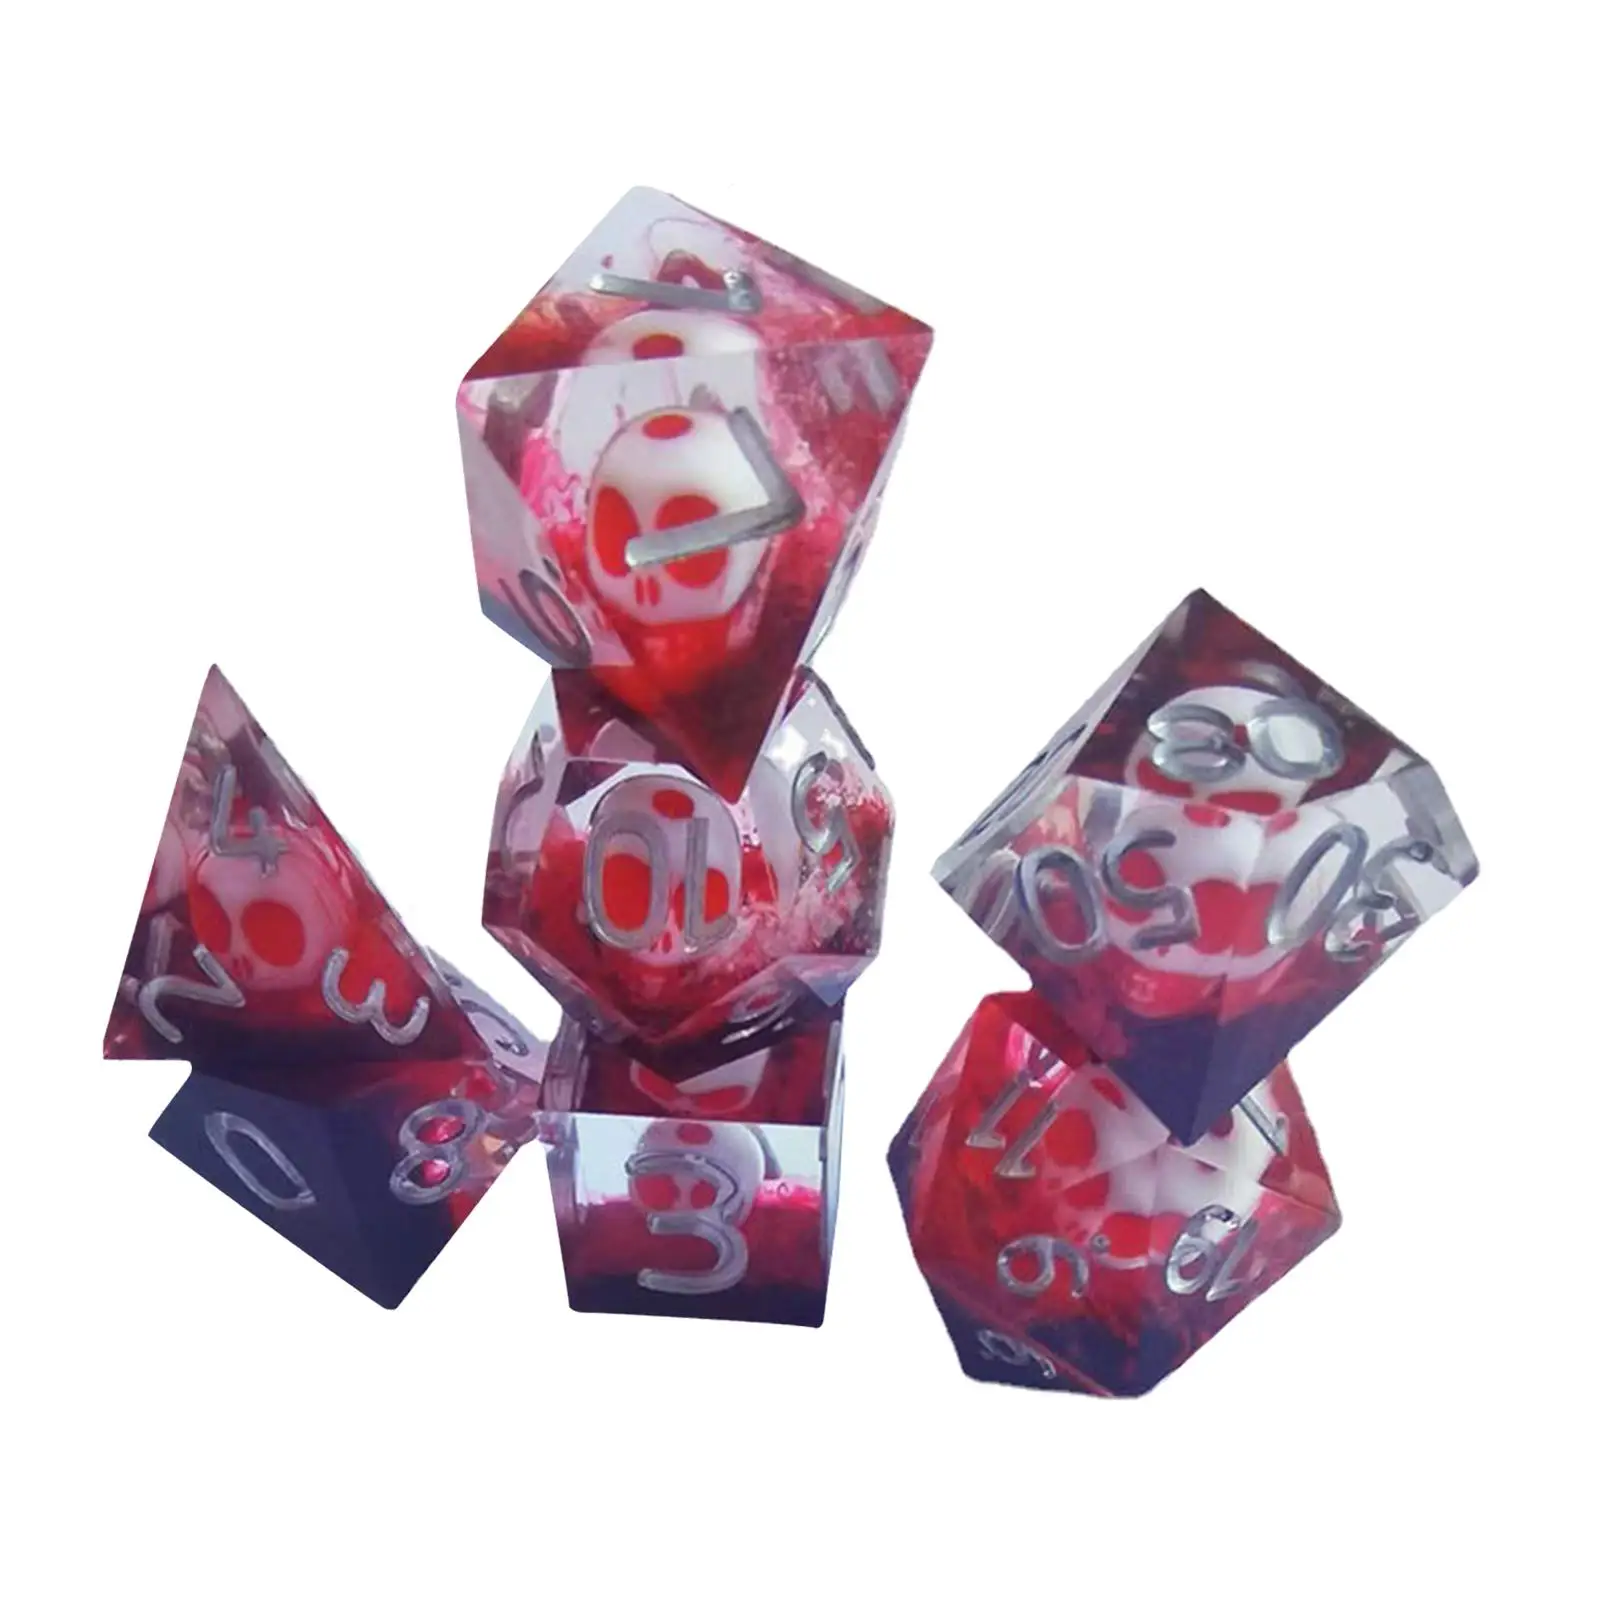 7x Polyhedral Dices Set Multi Sided Numeral Dices Supplies Props for Table Game Role Playing Games Leisure Party Entertainment